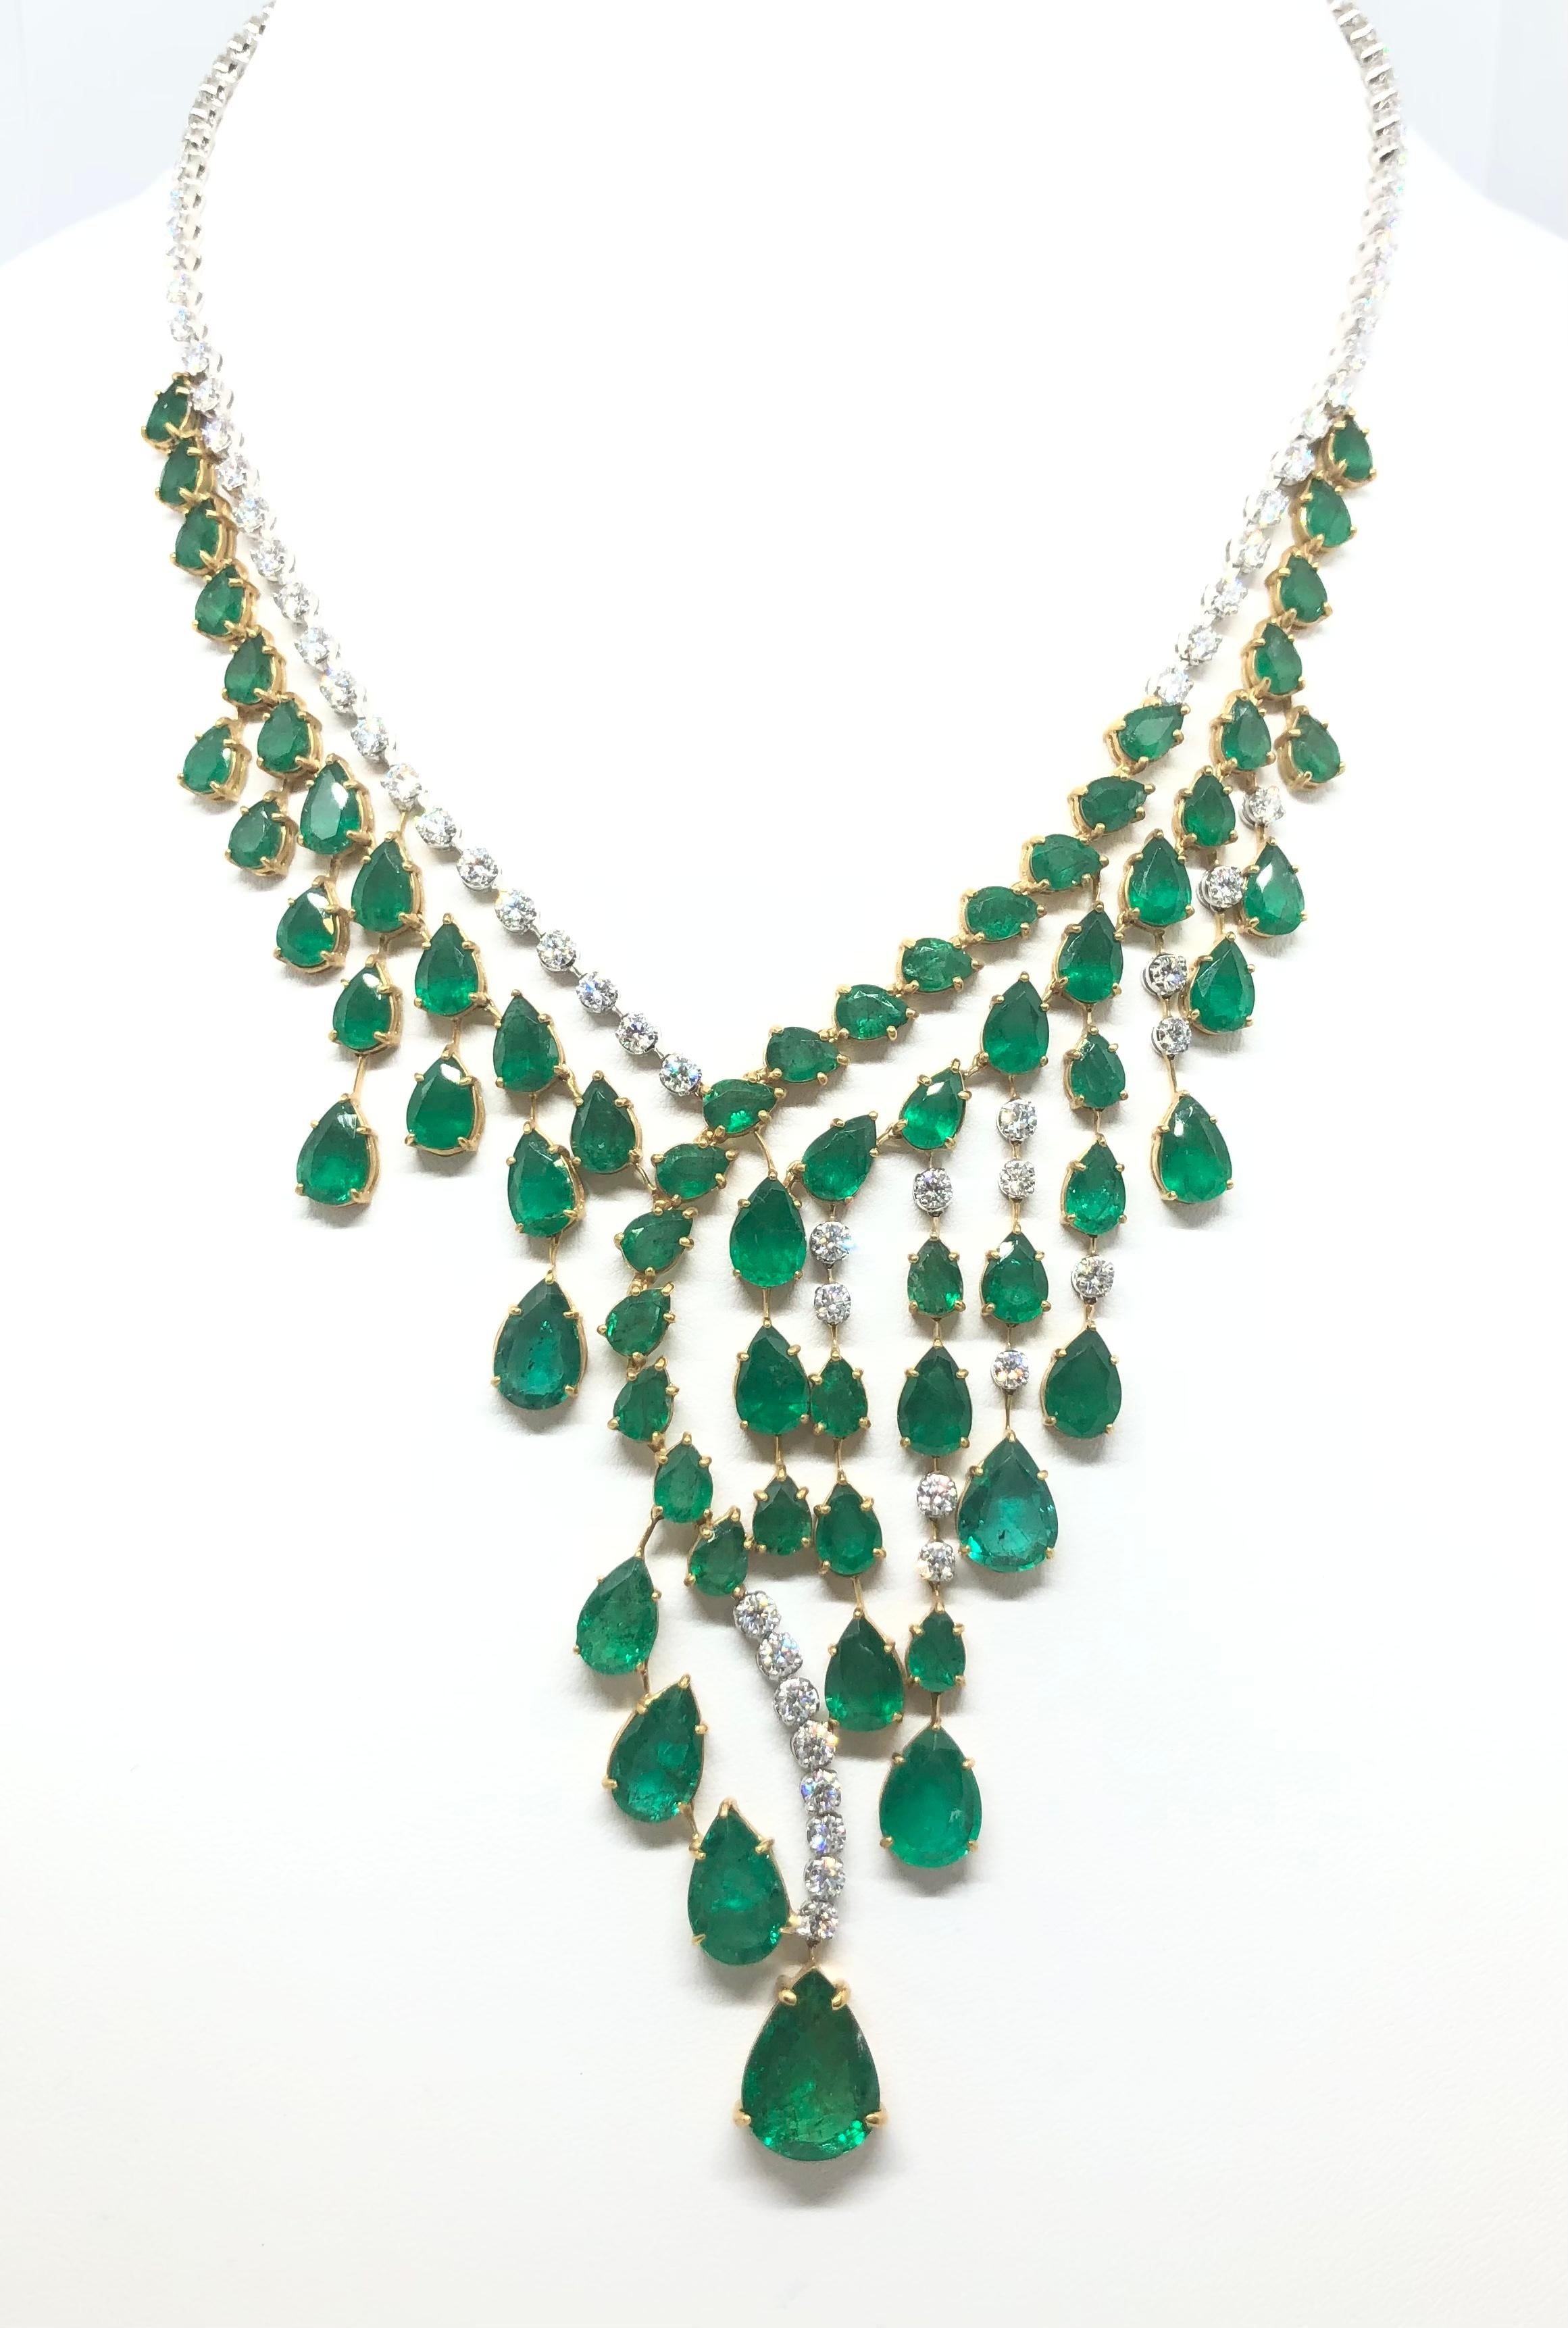 Emerald 67.91 carats with Diamond 10.71 carats Necklace set in 18 Karat White Gold Settings

Width:  17.0 cm 
Length:  40.0 cm
Total Weight: 70.12 grams

Extender: 5.3 cm

